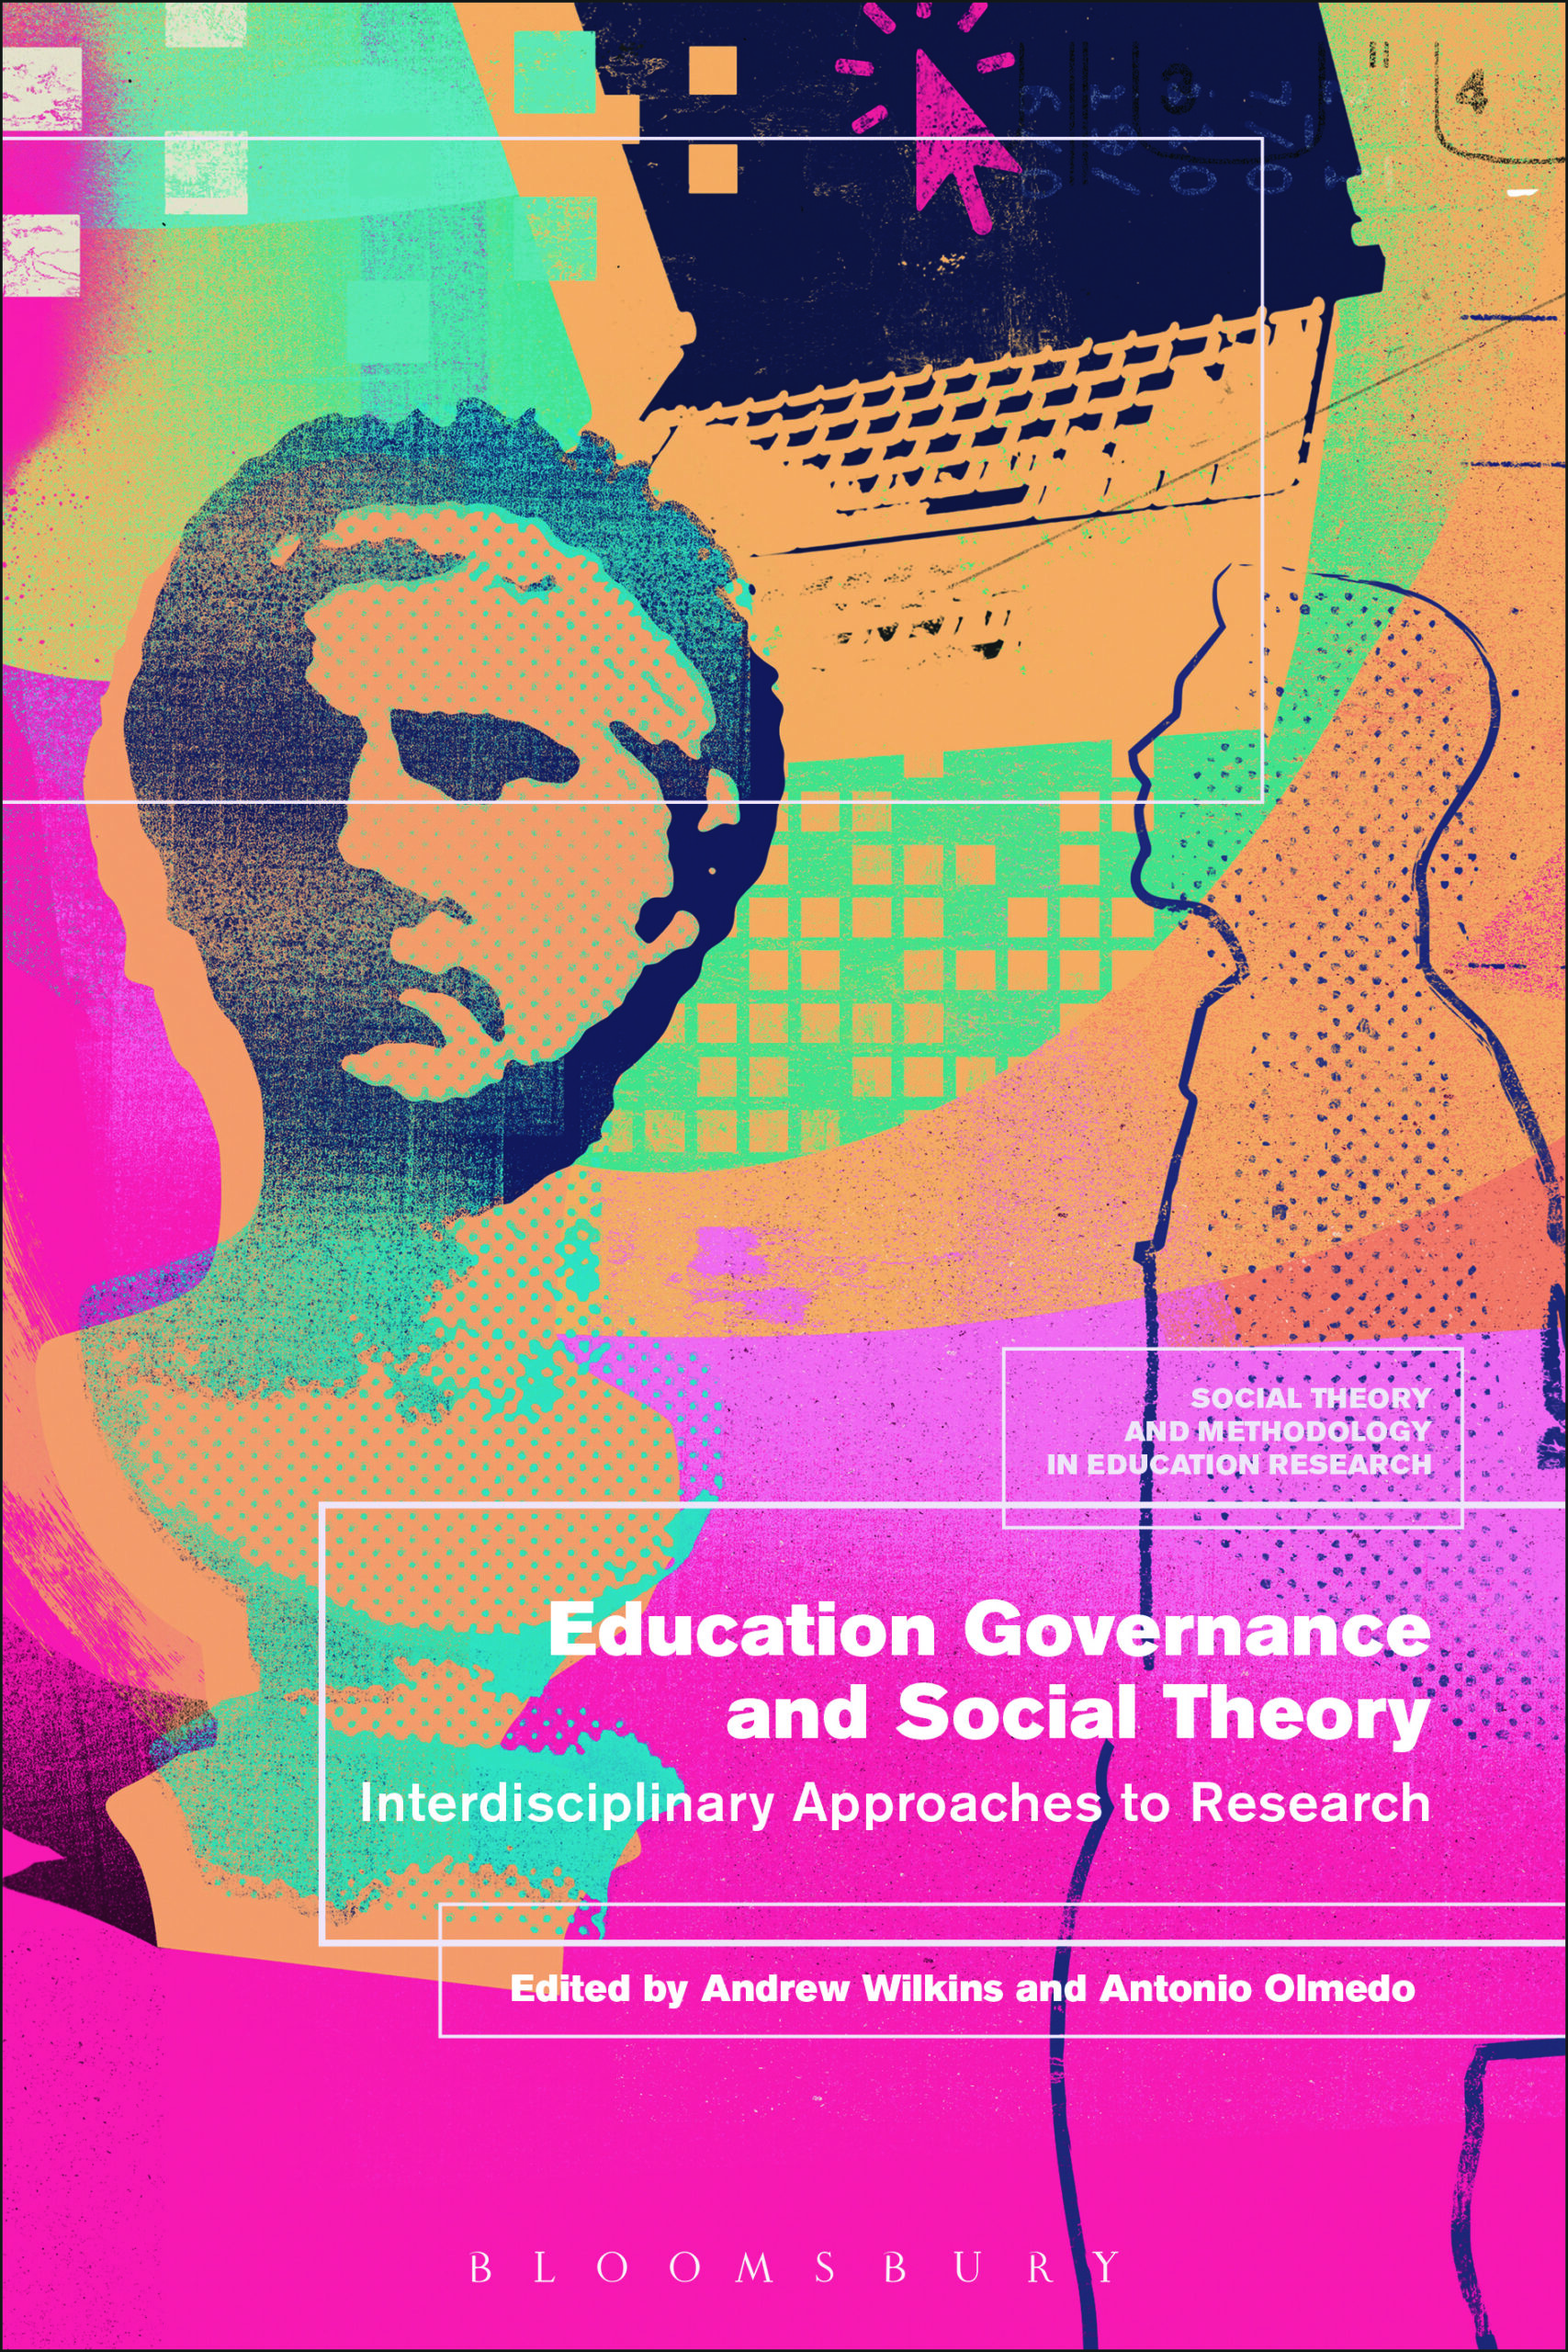 Education Governance and Social Theory: Interdisciplinary Approaches to Research